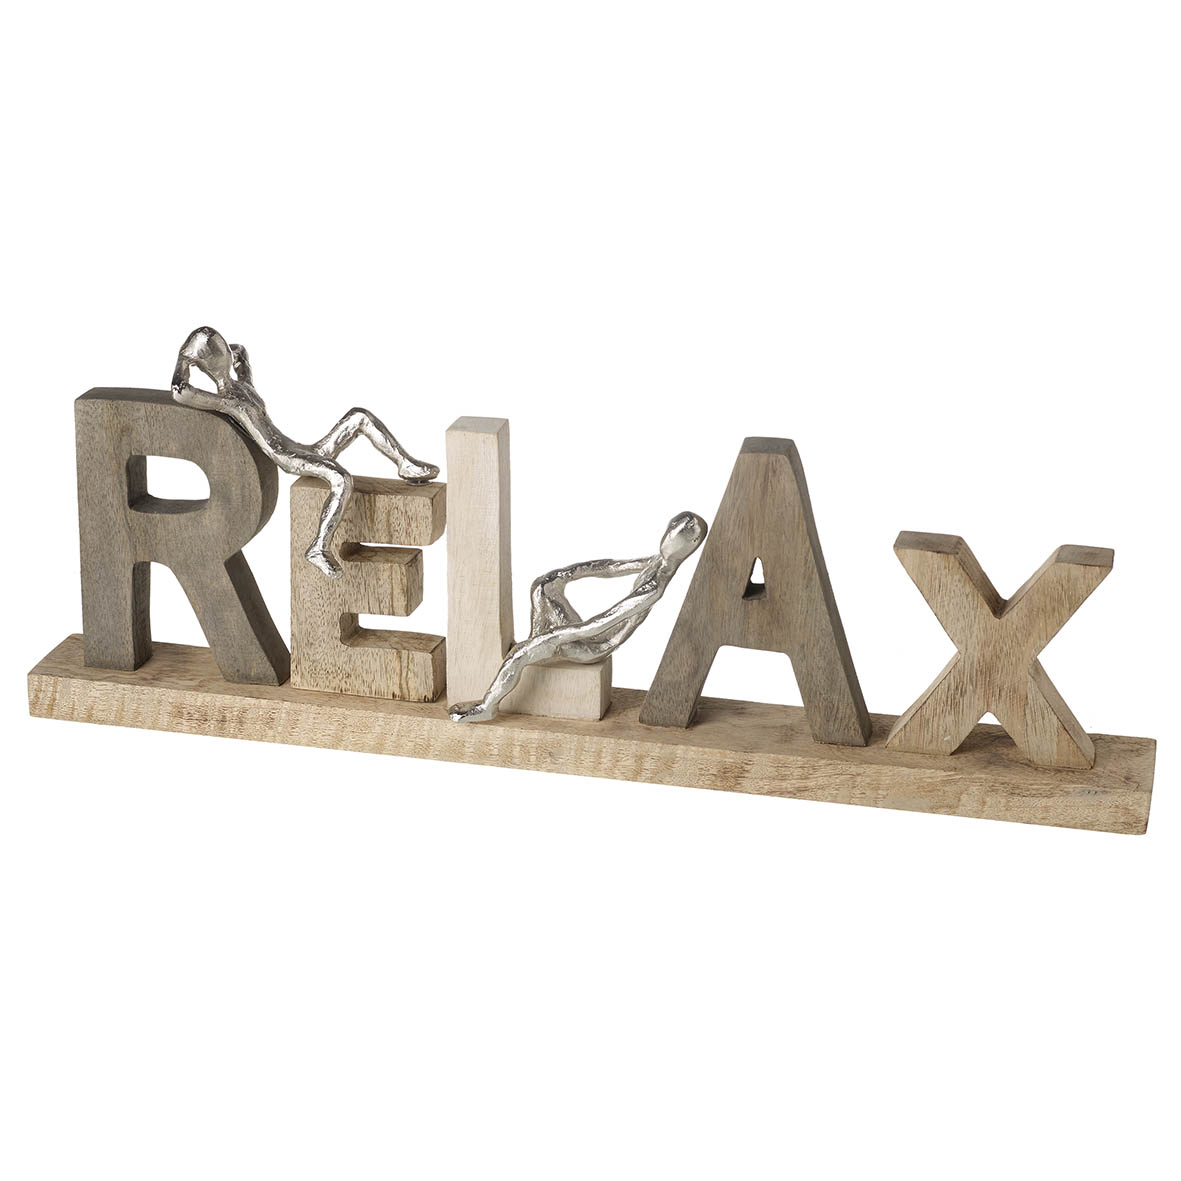 Ornament 57x9x21,5 cm RELAX SIGN natural white